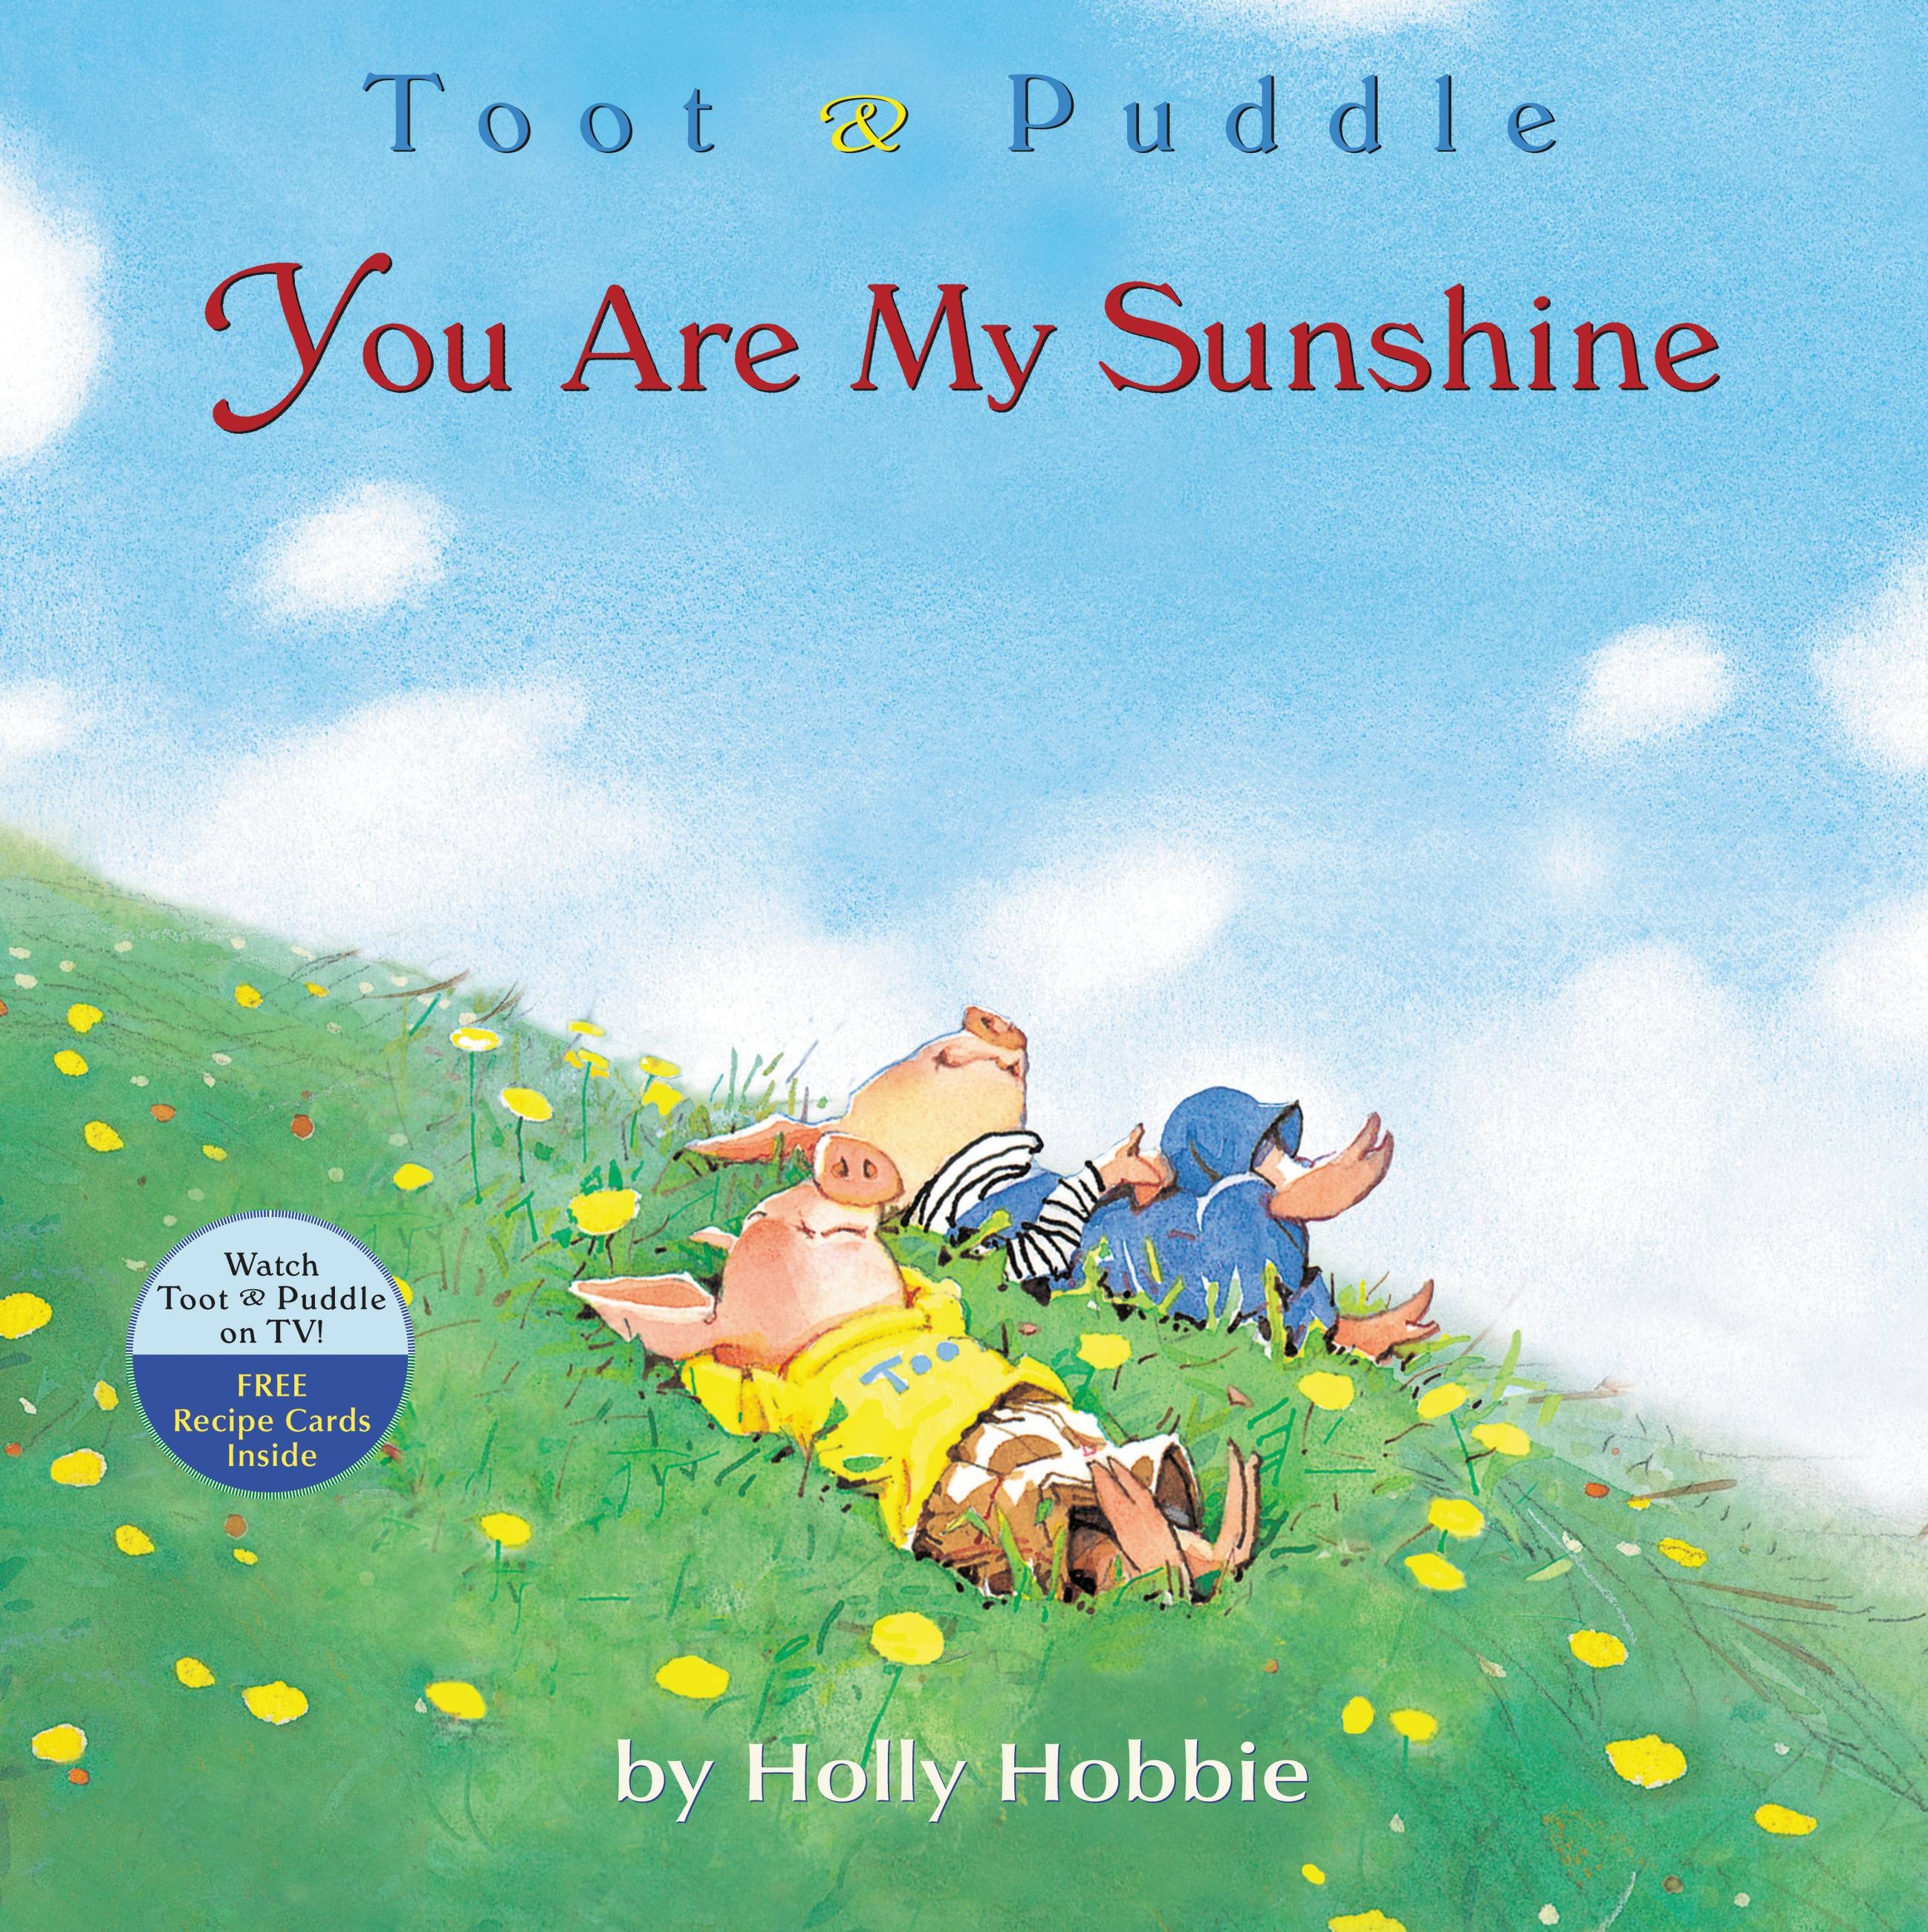 Toot & Puddle: You Are My Sunshine by Holly Hobbie